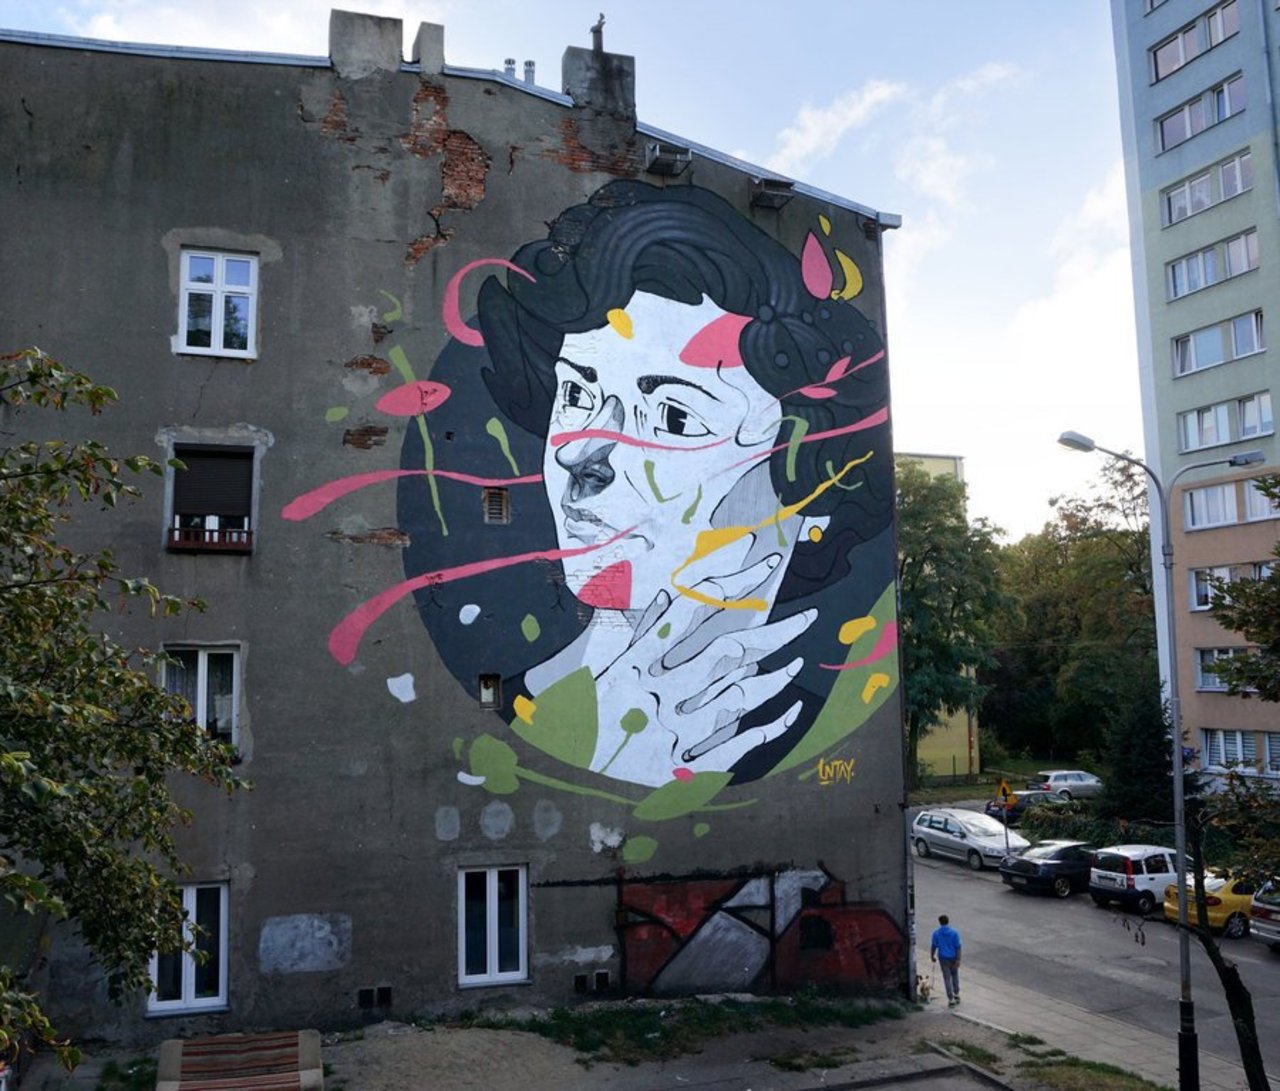 This awesome piece is a portrait of the artist's grandmother, a Holocaust survivor, and was painted in the Jewish ghetto district in Łódź, #Poland. -- Mural by #UNTAY (http://globalstreetart.com/untay). -- #globalstreetart #streetart #art #graffiti #lodz https://t.co/KJjdzt959i